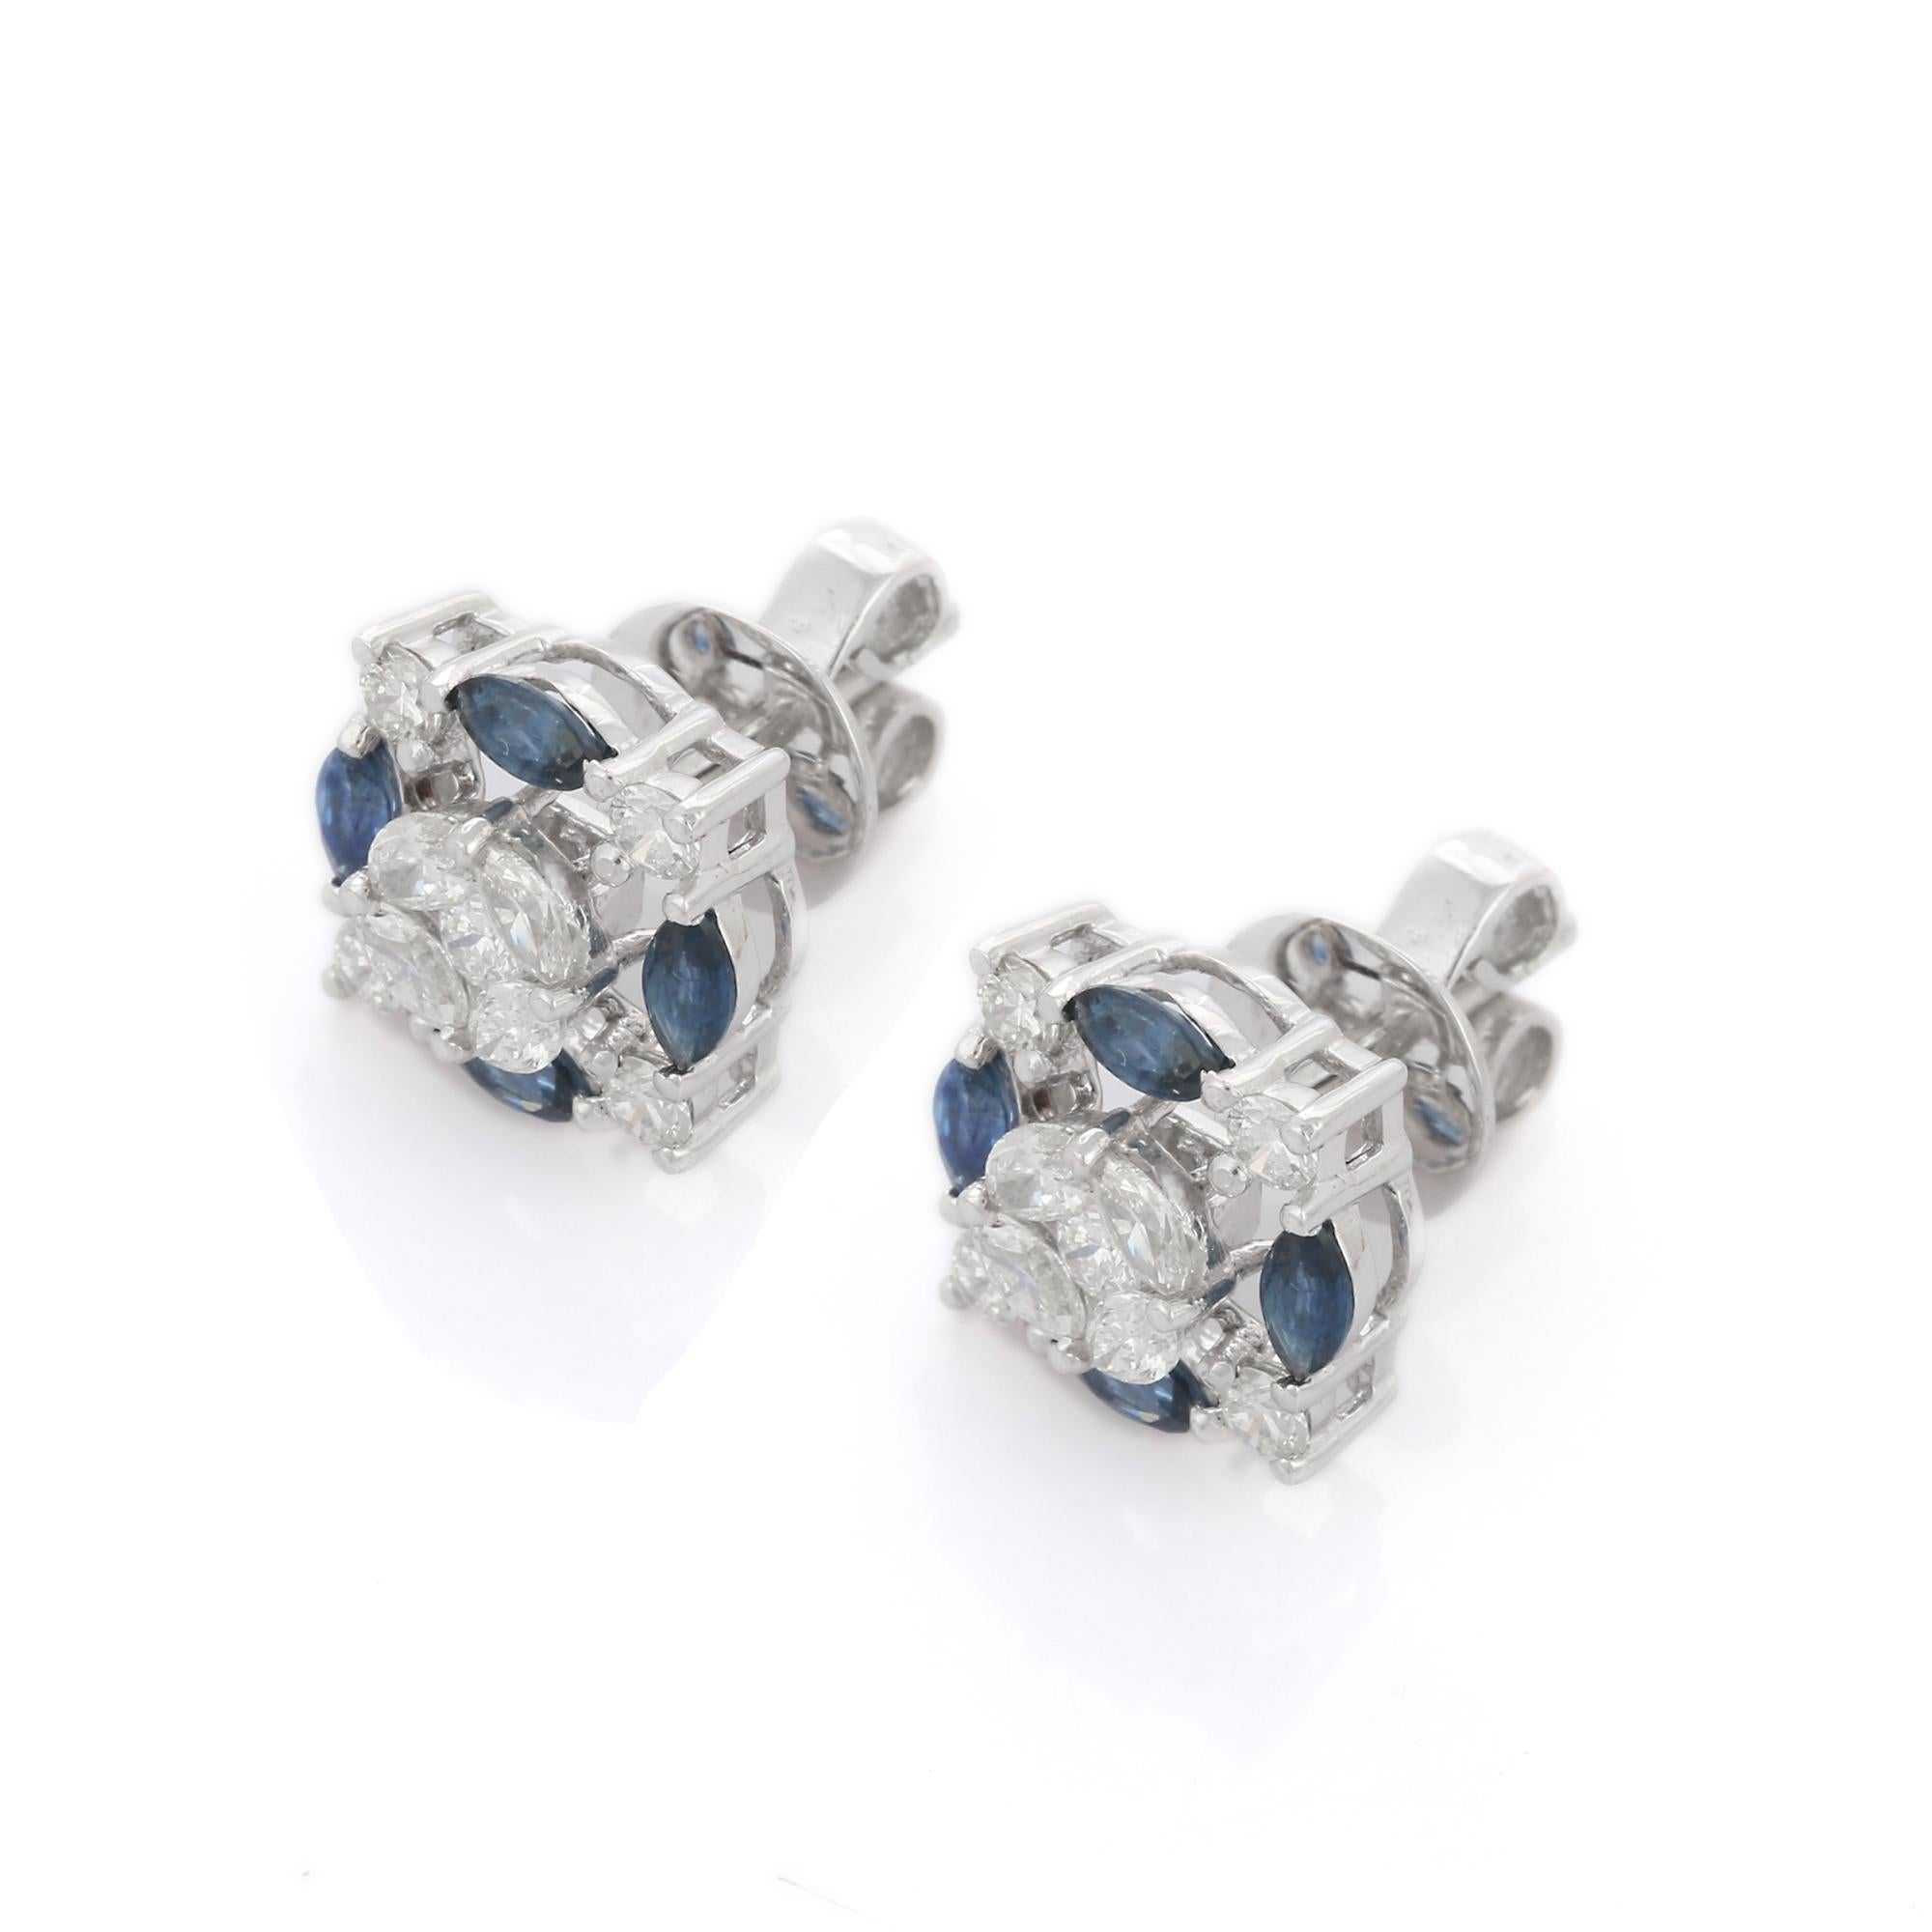 Studs create a subtle beauty while showcasing the colors of the natural precious gemstones and illuminating diamonds making a statement.

Marquise cut blue sapphire studs in 18K gold. Embrace your look with these stunning pair of earrings suitable